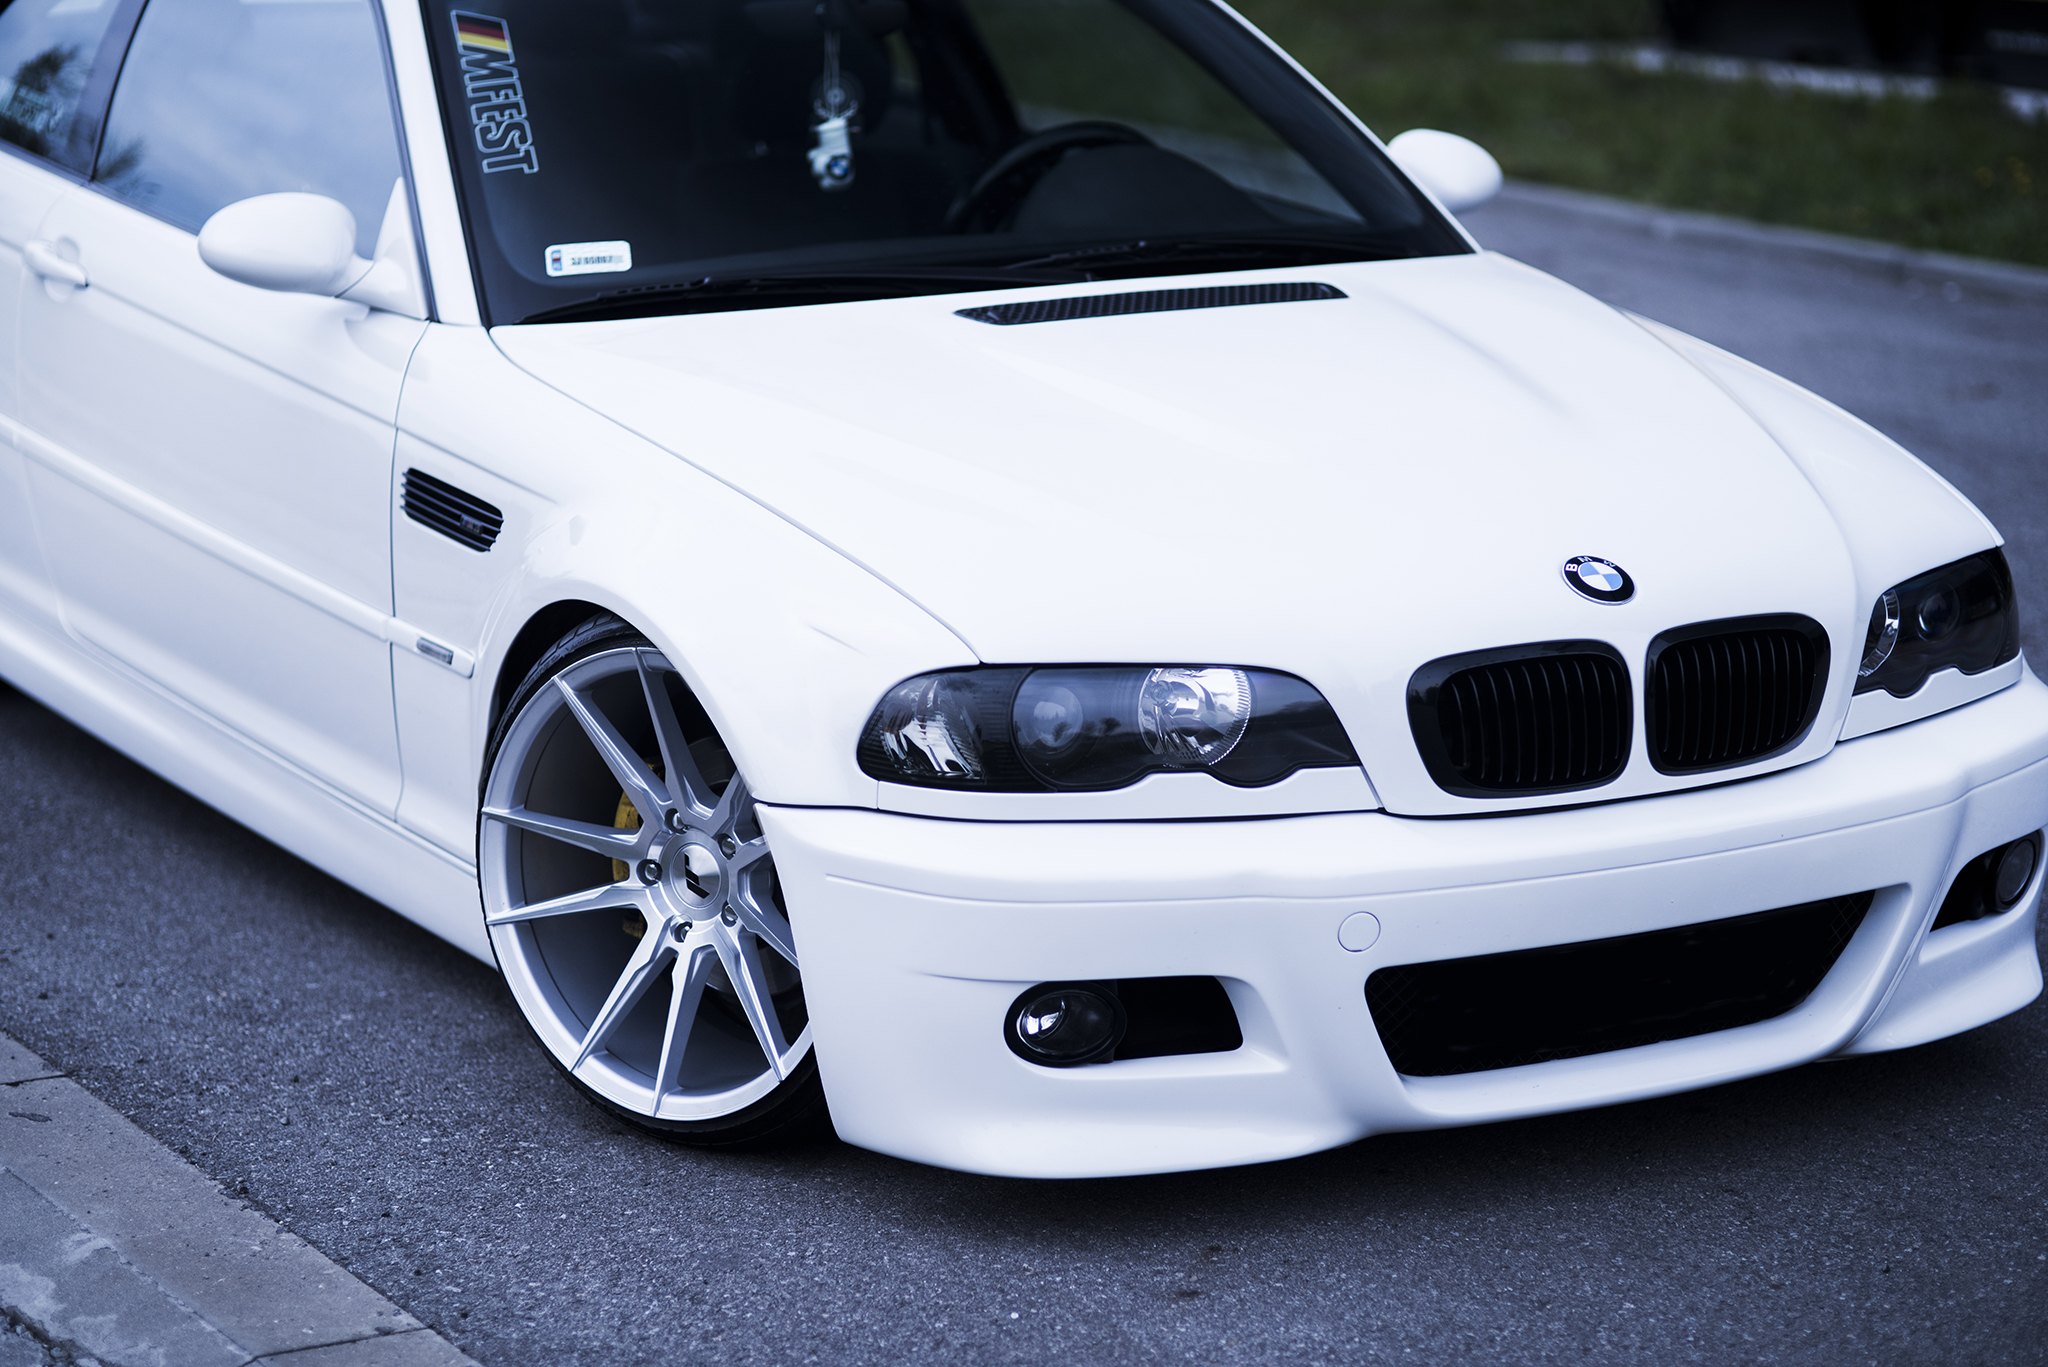 Custom Front Bumper on White BMW 3-Series - Photo by JR Wheels